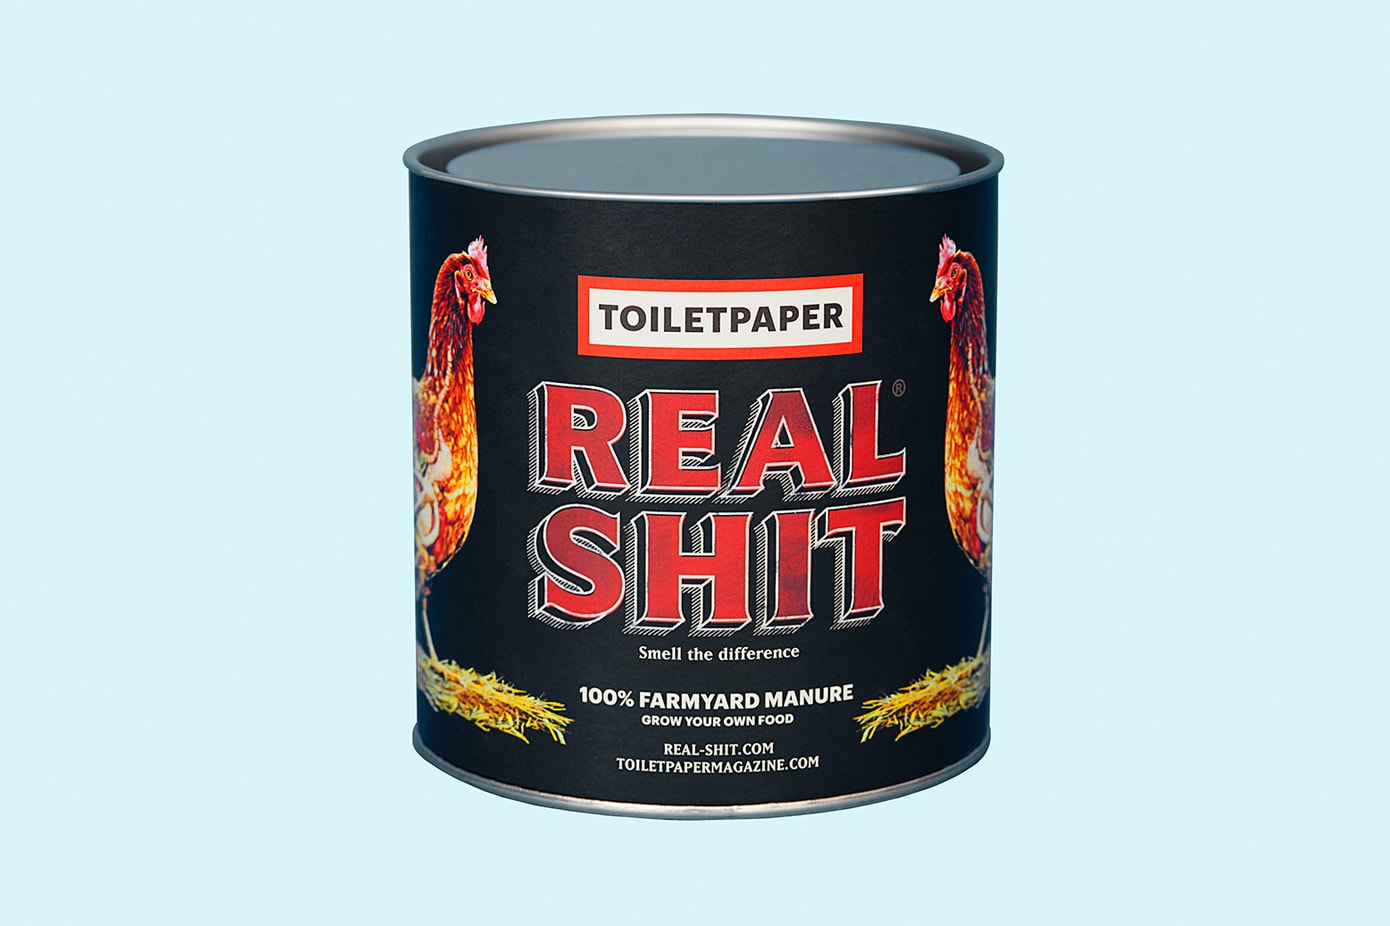 REAL SHIT x TOILETPAPER Organic Manure Cans